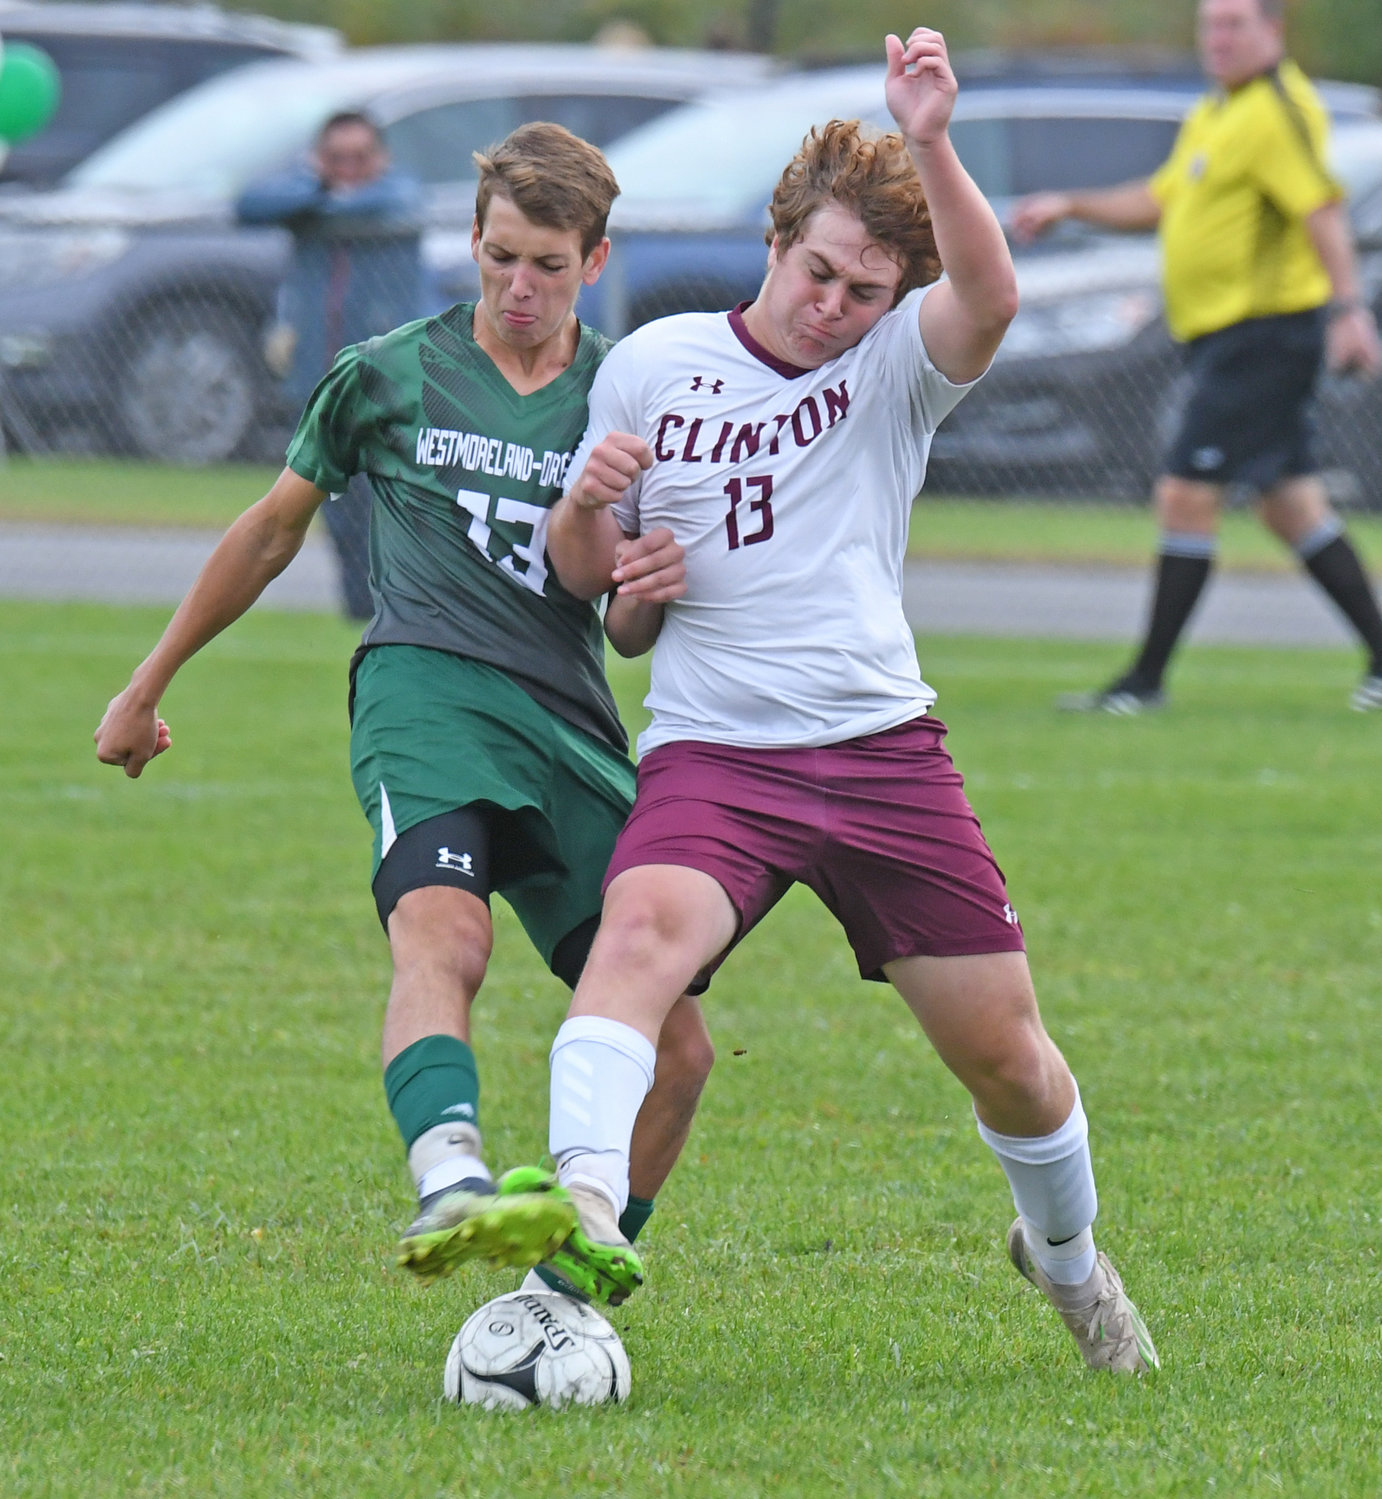 Westmoreland/Oriskany's Tyler Szarek, left, and Clinton's Alec Emery arrive at the ball at the same time in the first half Wednesday at Westmoreland. The hosts won 2-1, clinching the Center State Conference Division I regular season title.